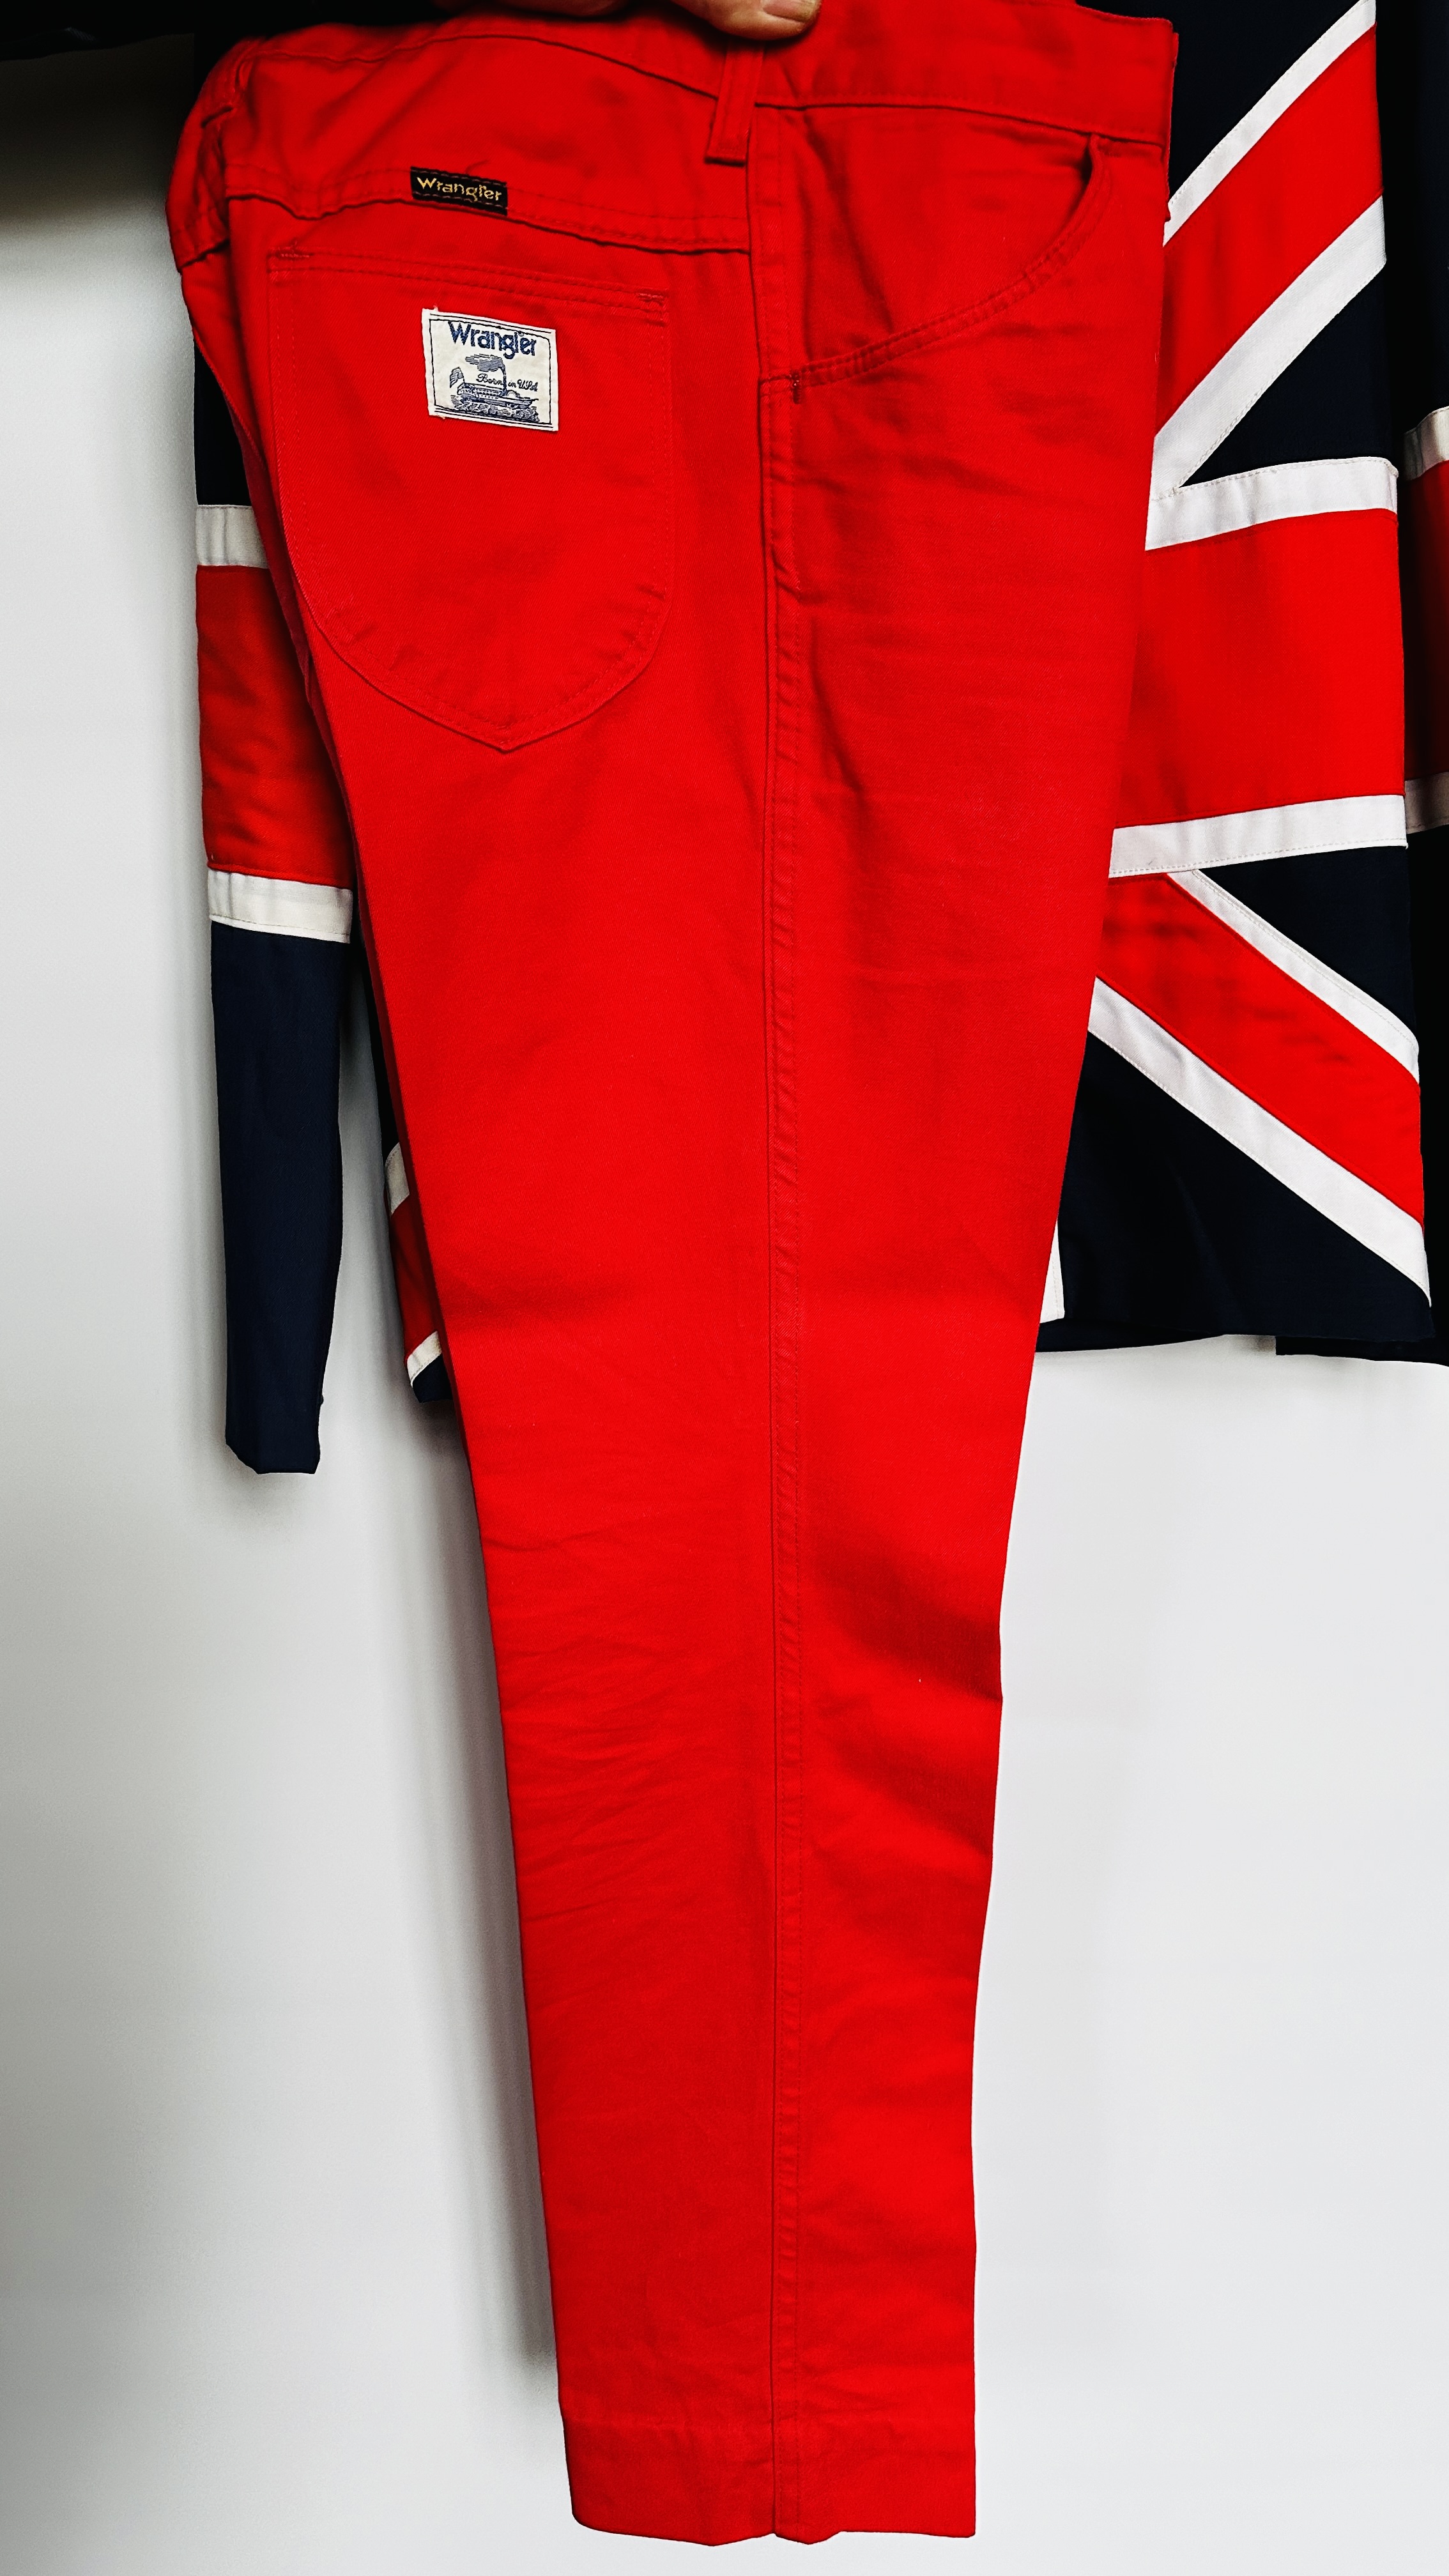 1960S UNION JACKET SUIT, RED TROUSERS - JACKET RED/WHITE/BLUE - A/F CONDITION, SOLD AS SEEN. - Image 11 of 12